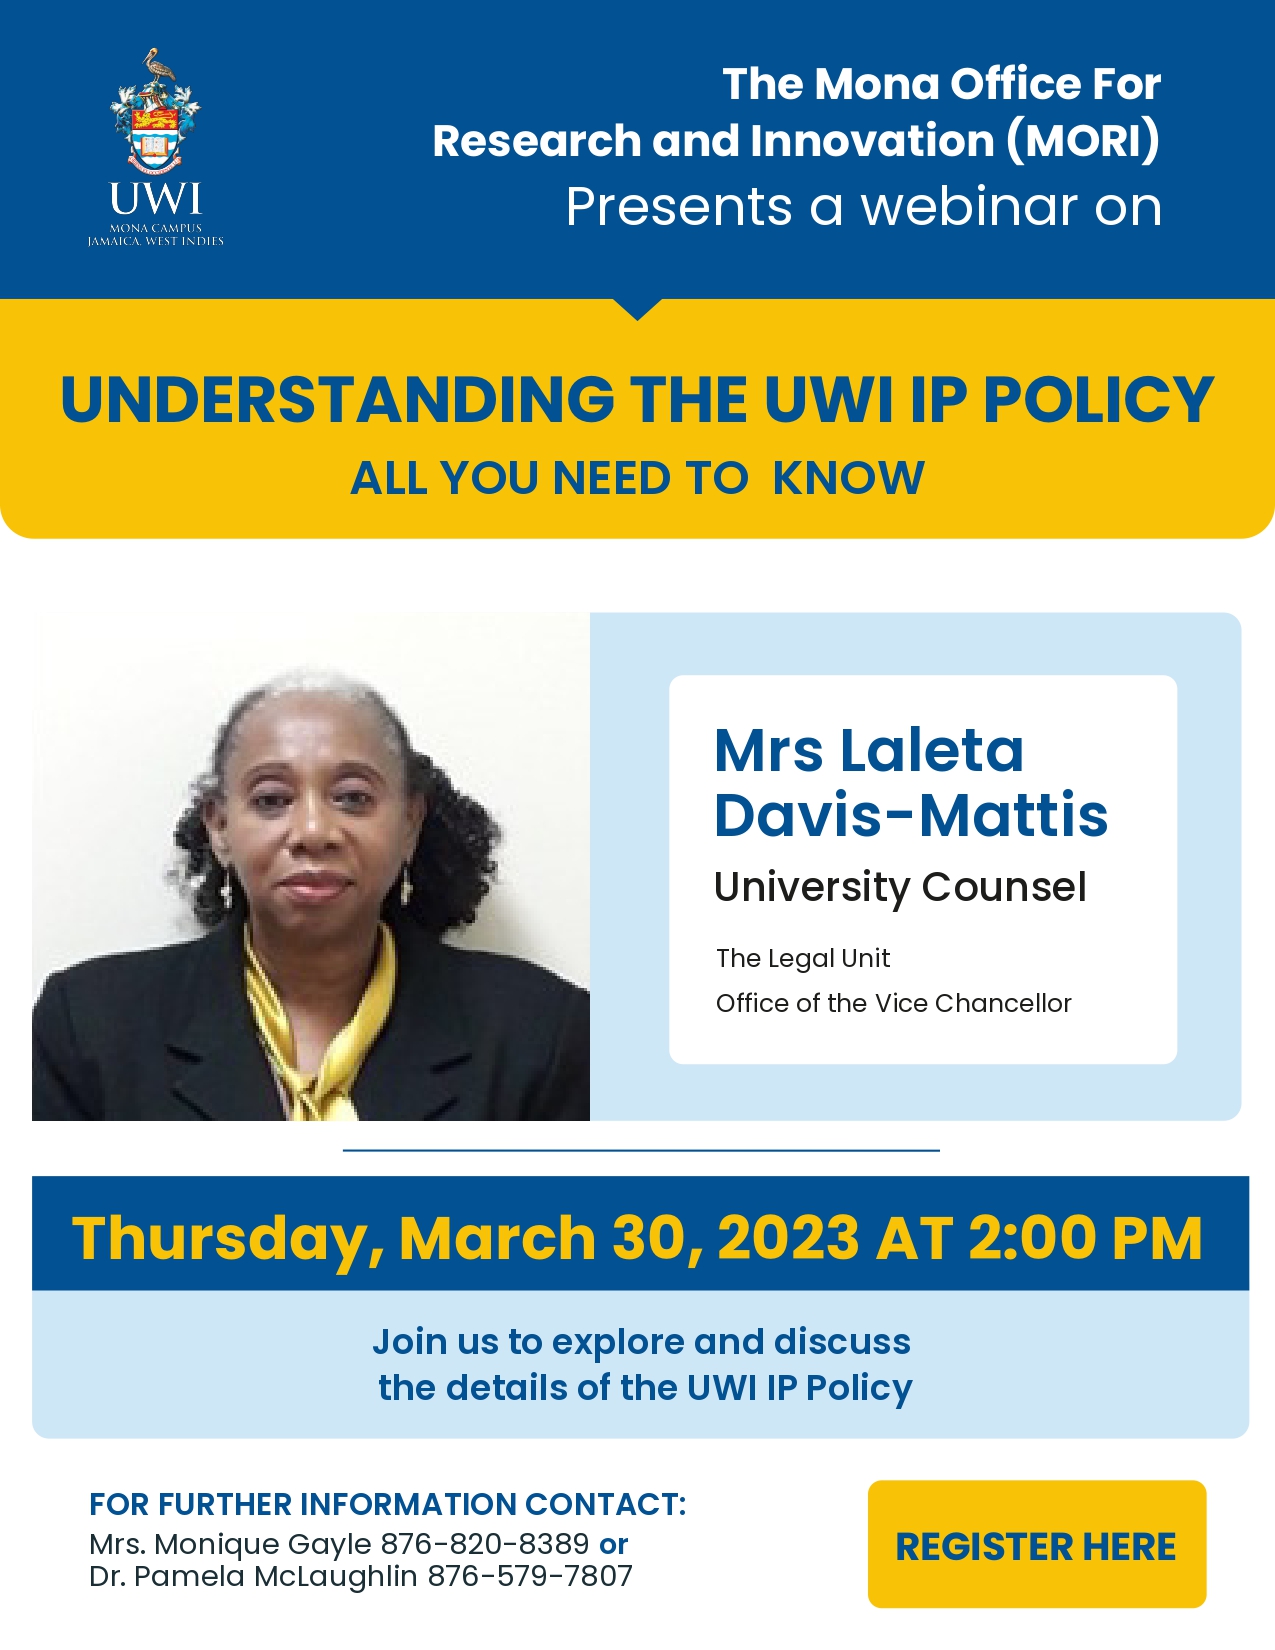 SAVE THE DATE: UNDERSTANDING THE UWI IP POLICY